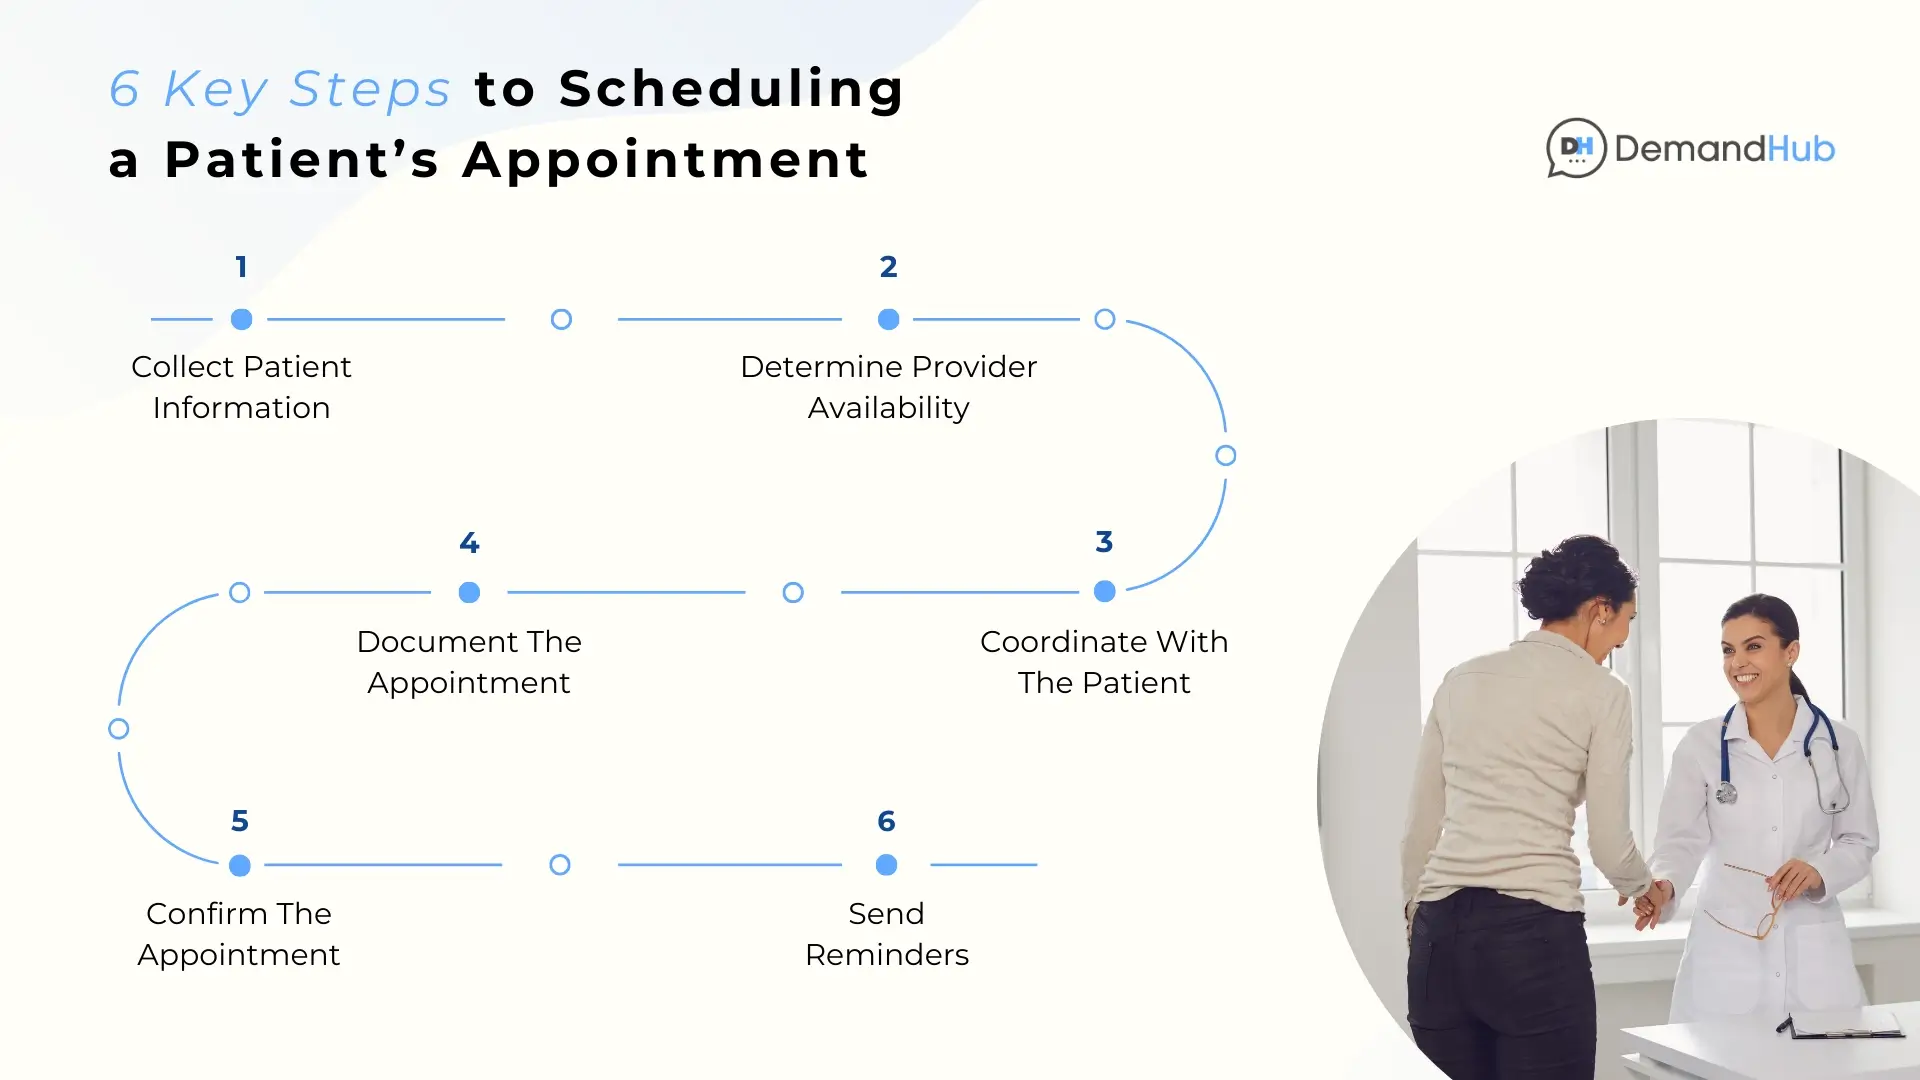 Six Key Steps to Schedule a Patient's Appointment